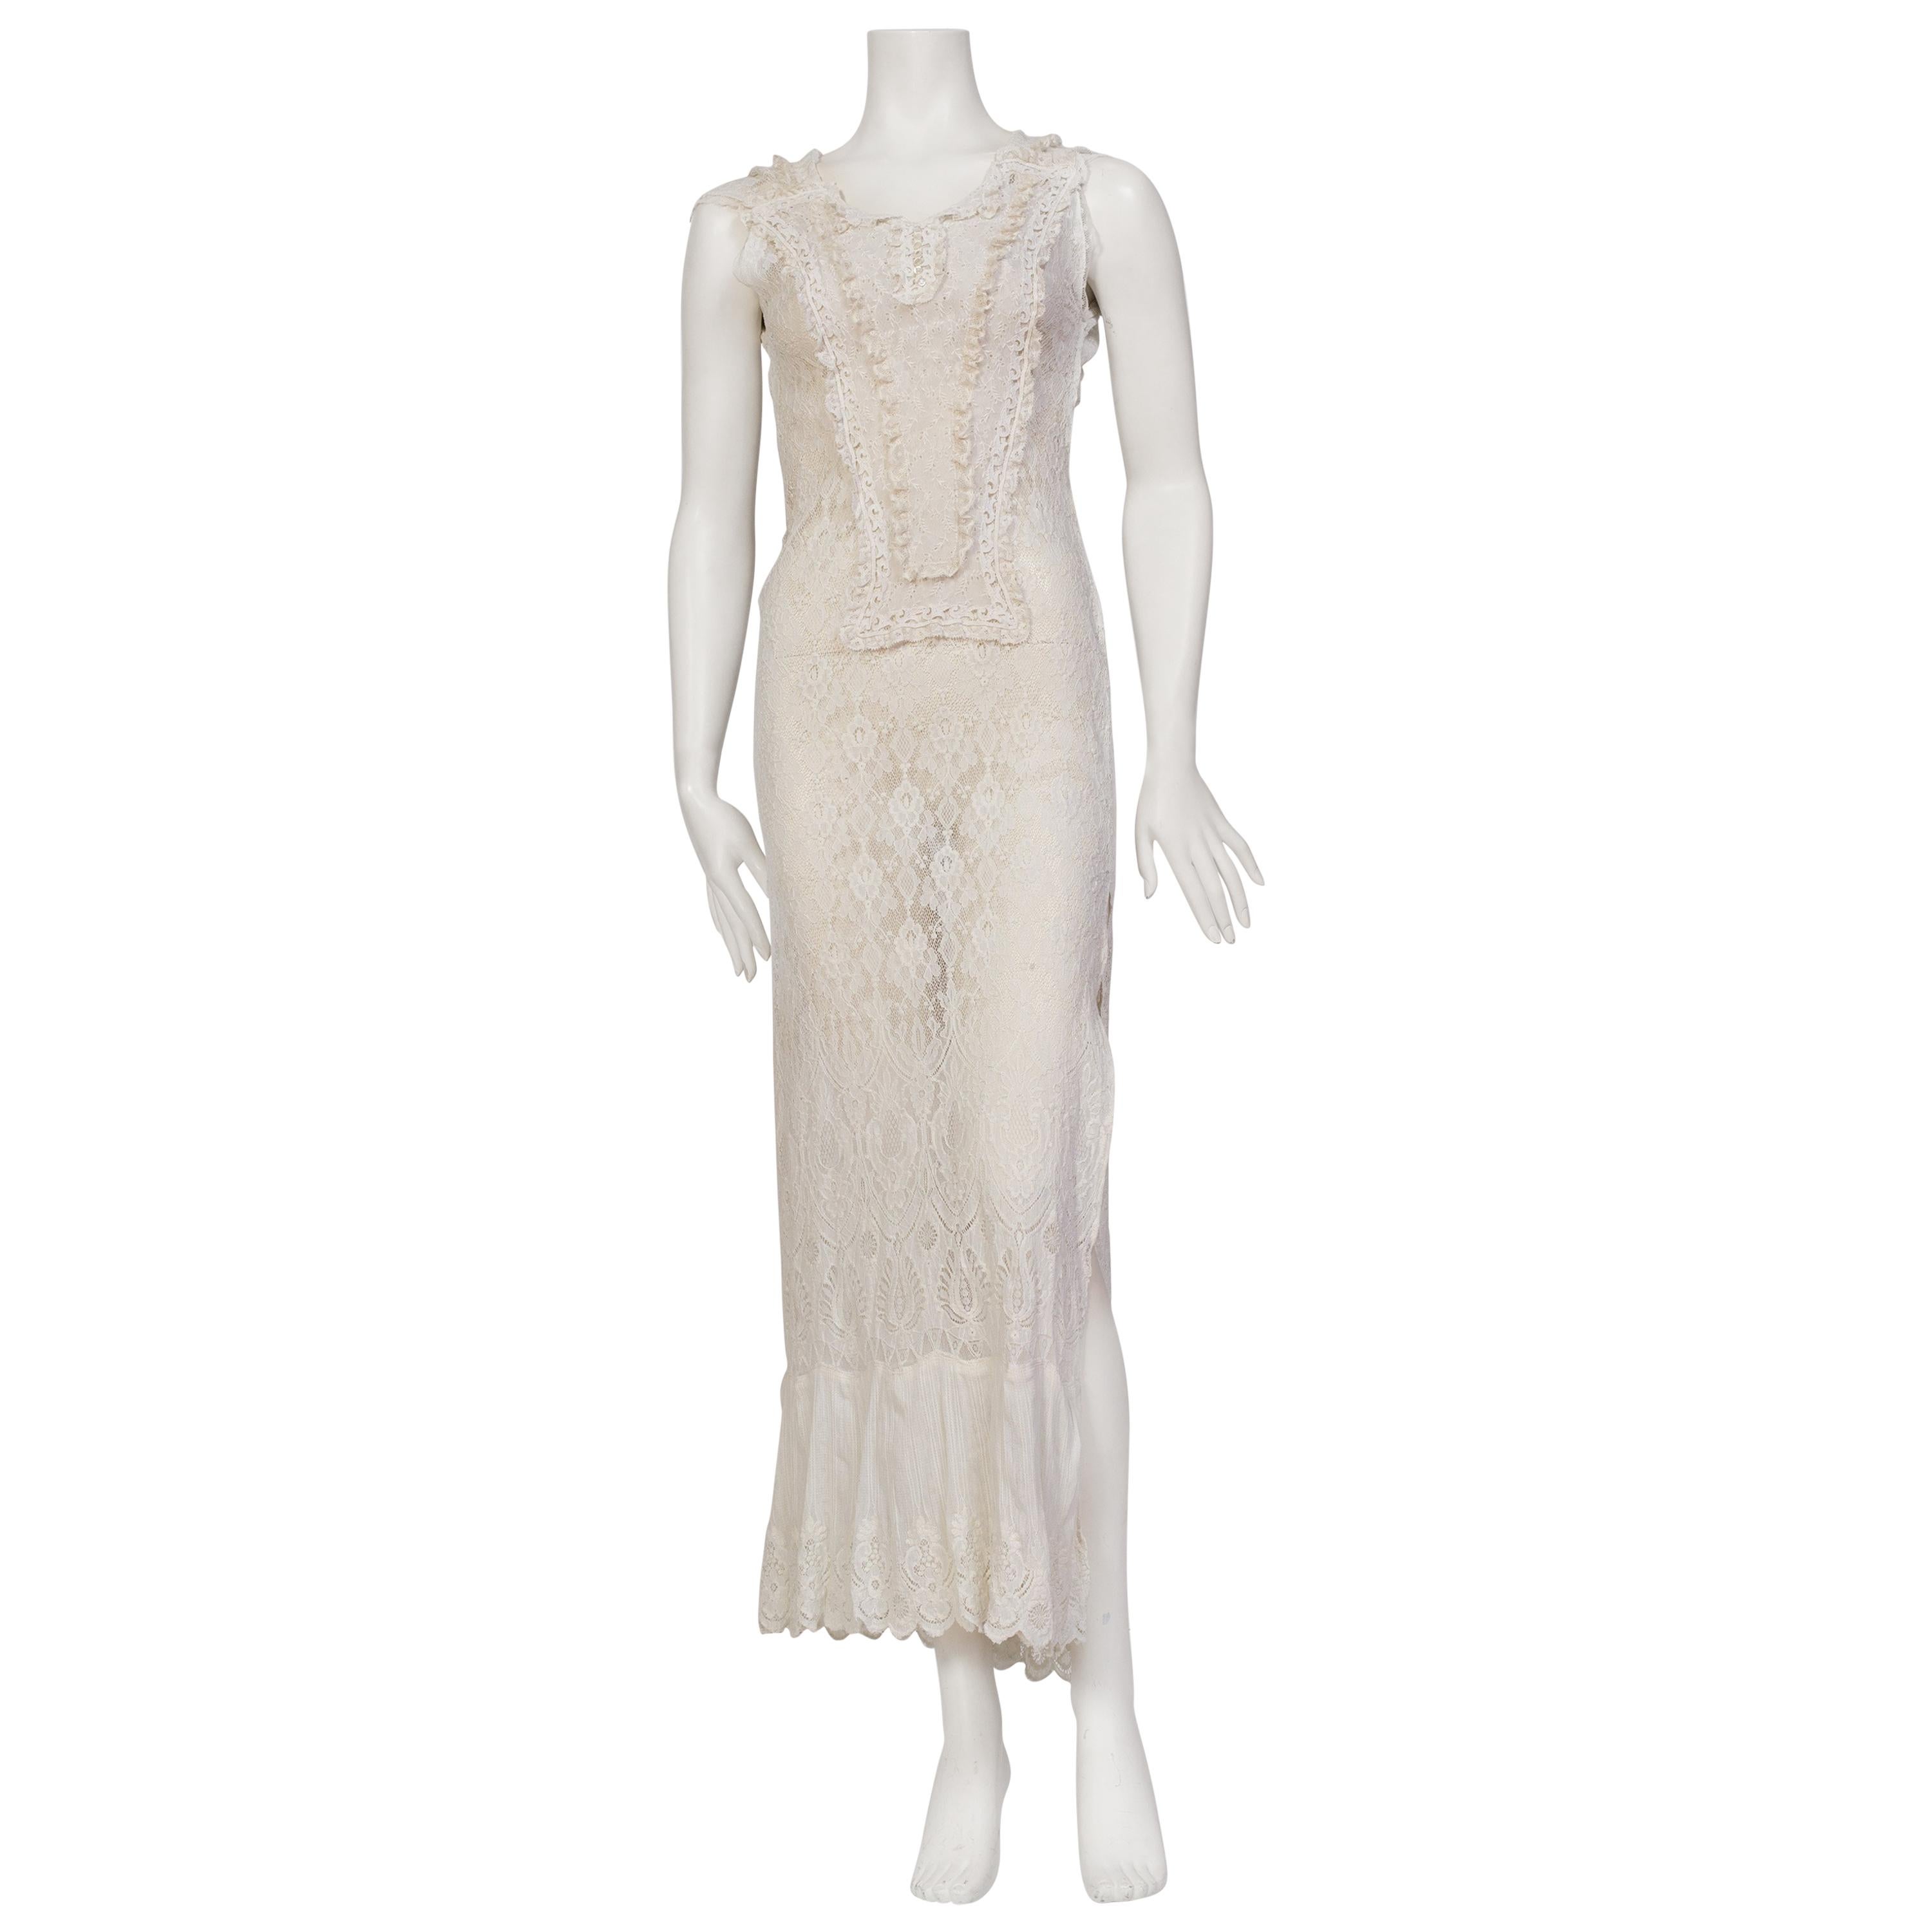 MORPHEW COLLECTION White Maxi Resort Dress Made From Edwardian & 1930'S Lace